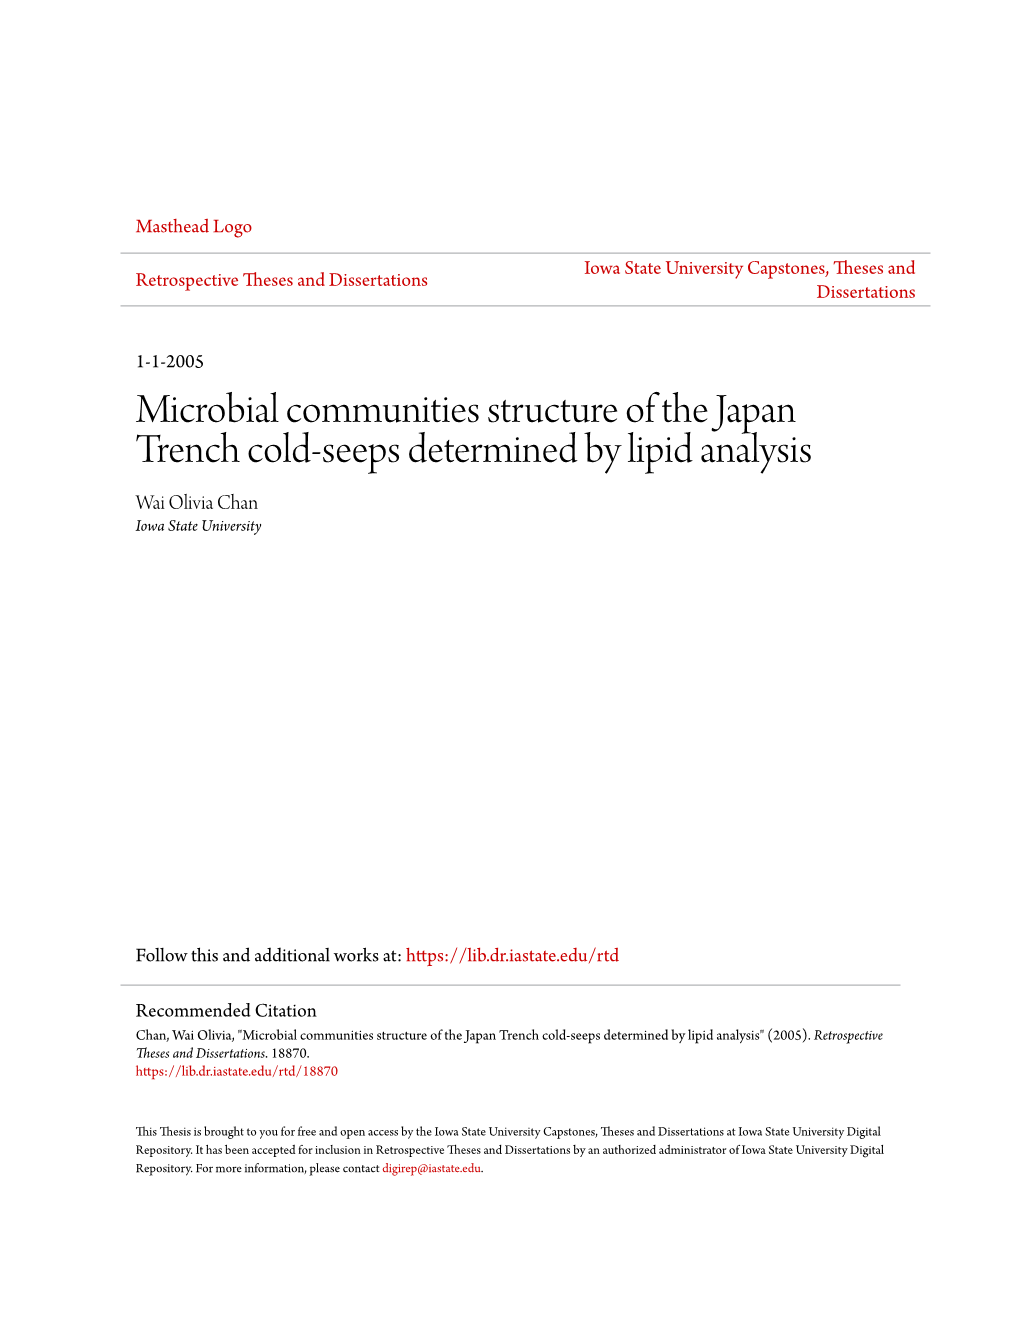 Microbial Communities Structure of the Japan Trench Cold-Seeps Determined by Lipid Analysis Wai Olivia Chan Iowa State University